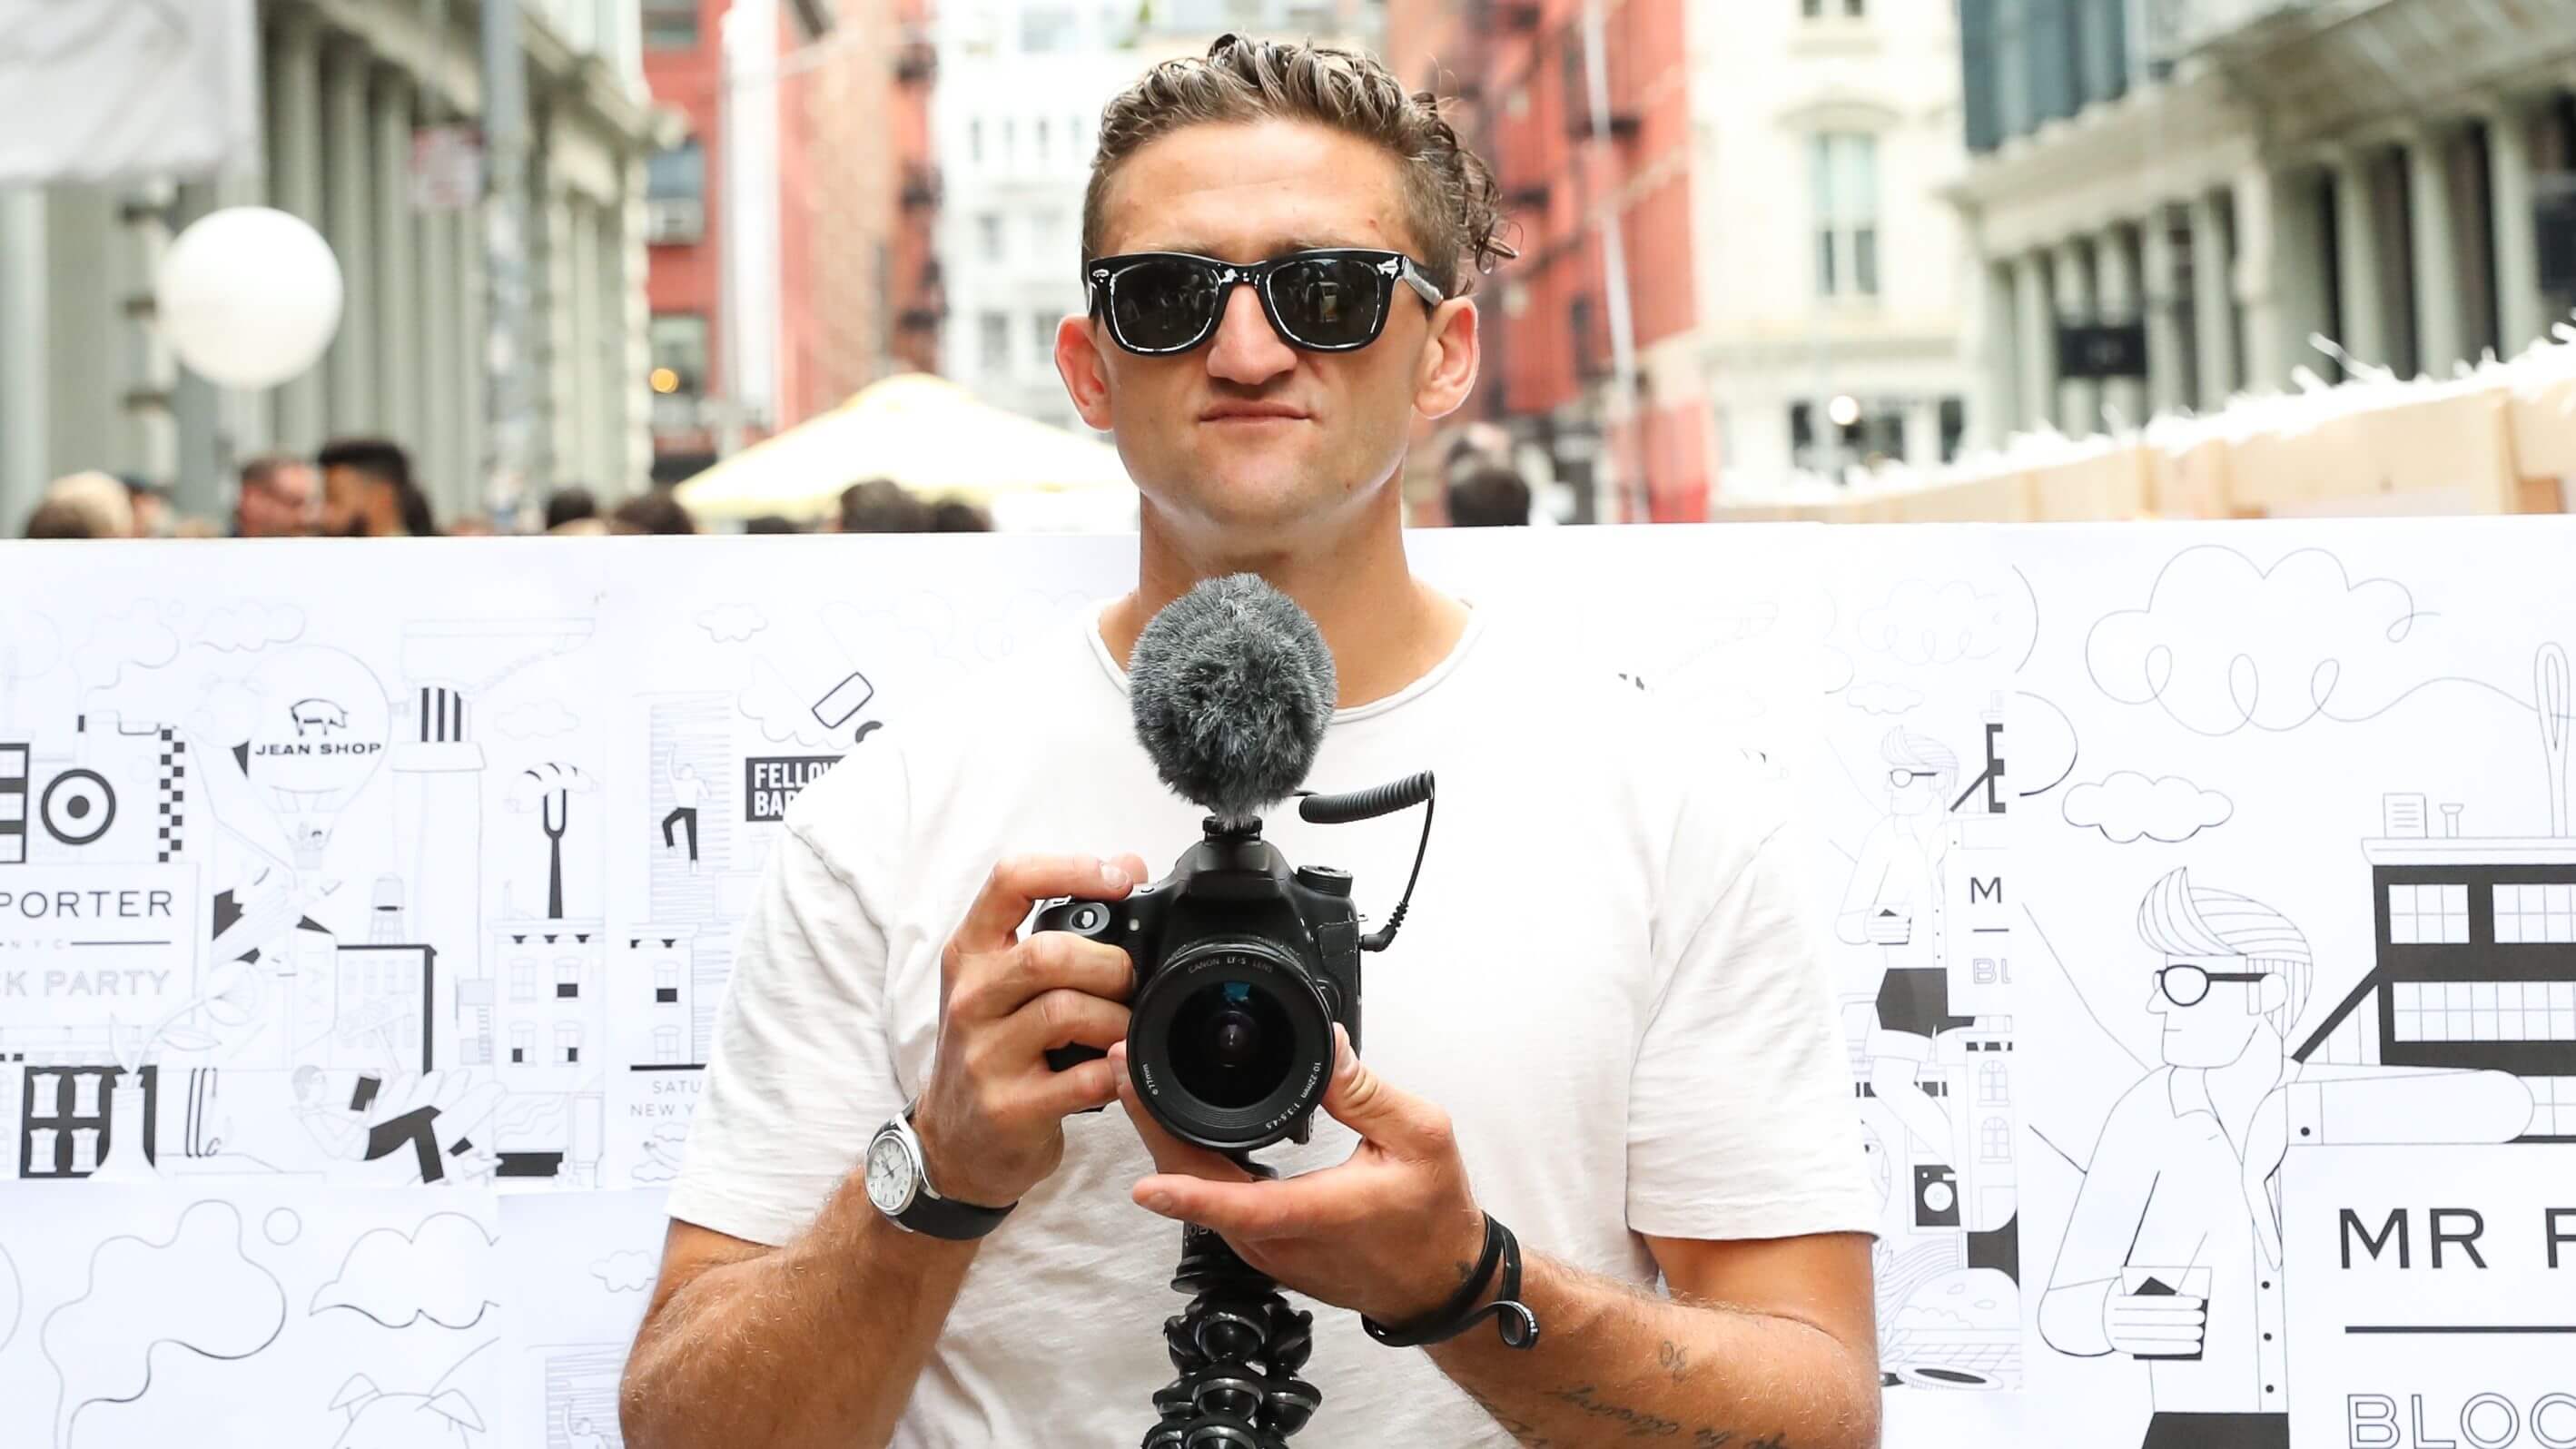 How to Make a YouTube Channel - Casey Neistat YouTuber